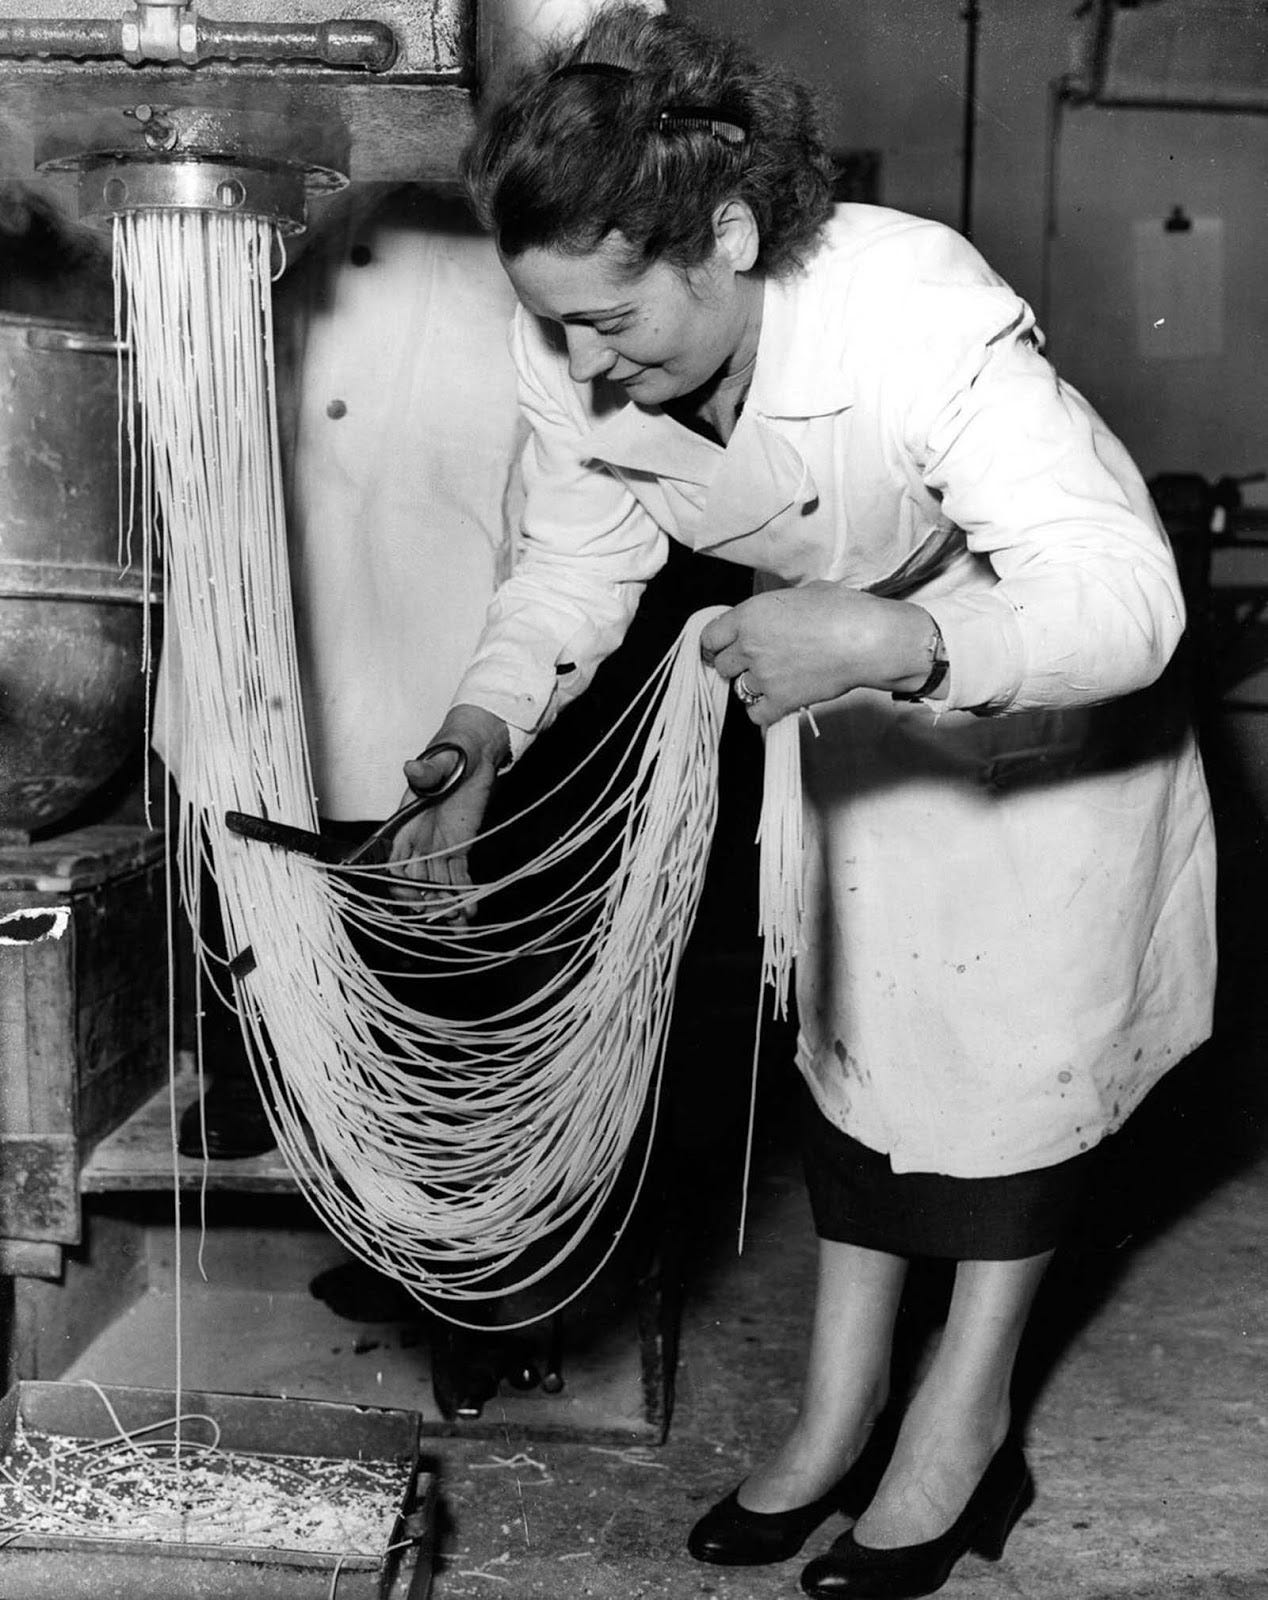 Zelda Albano cuts spaghetti into lengths as it emerges from a machine at a pasta factory in Holloway, London. 1955.